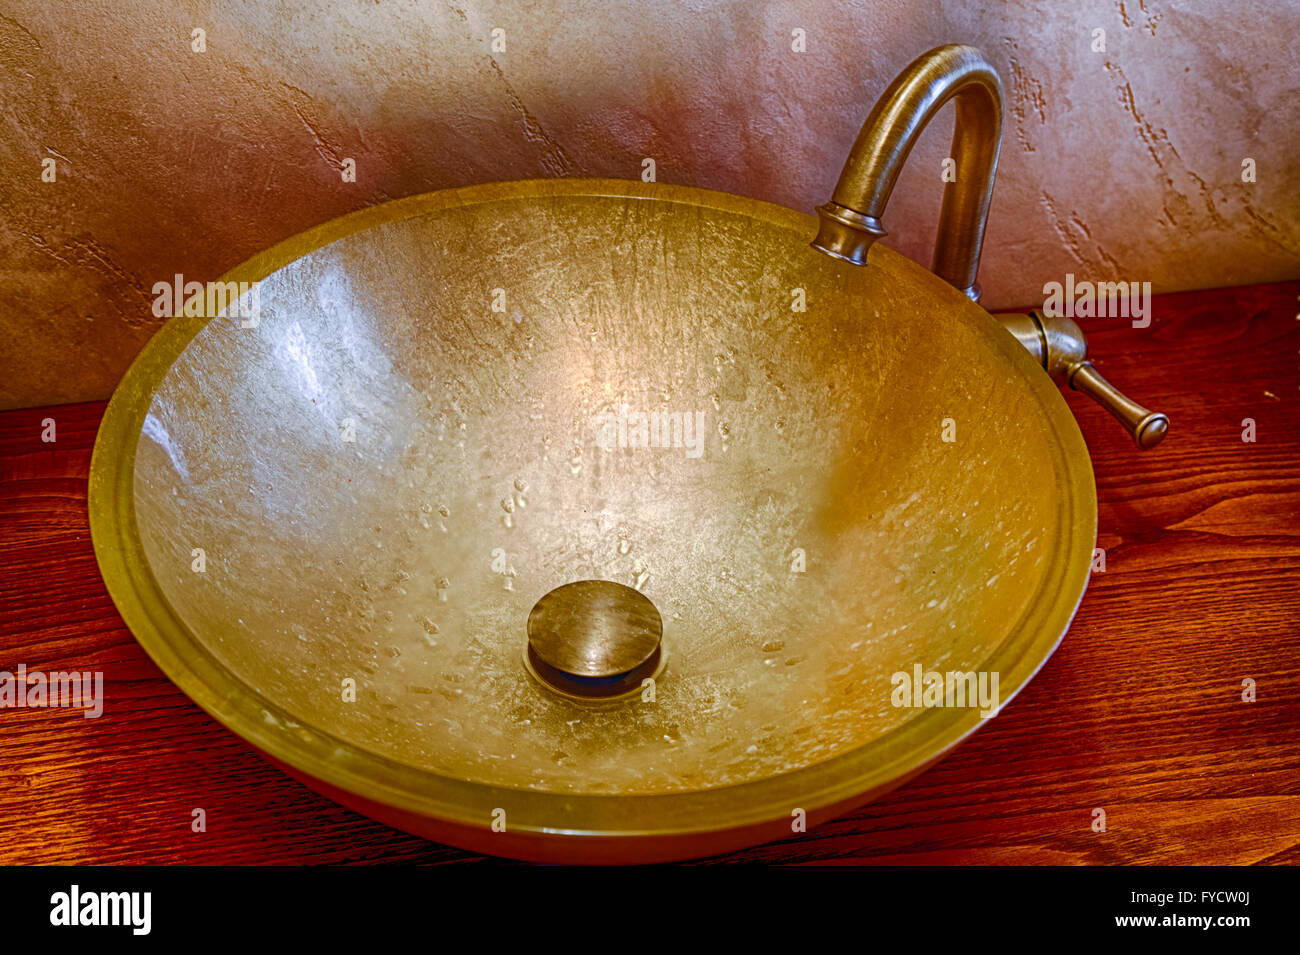 washbasin in golden leaf on tempered glass and brass faucet Stock Photo